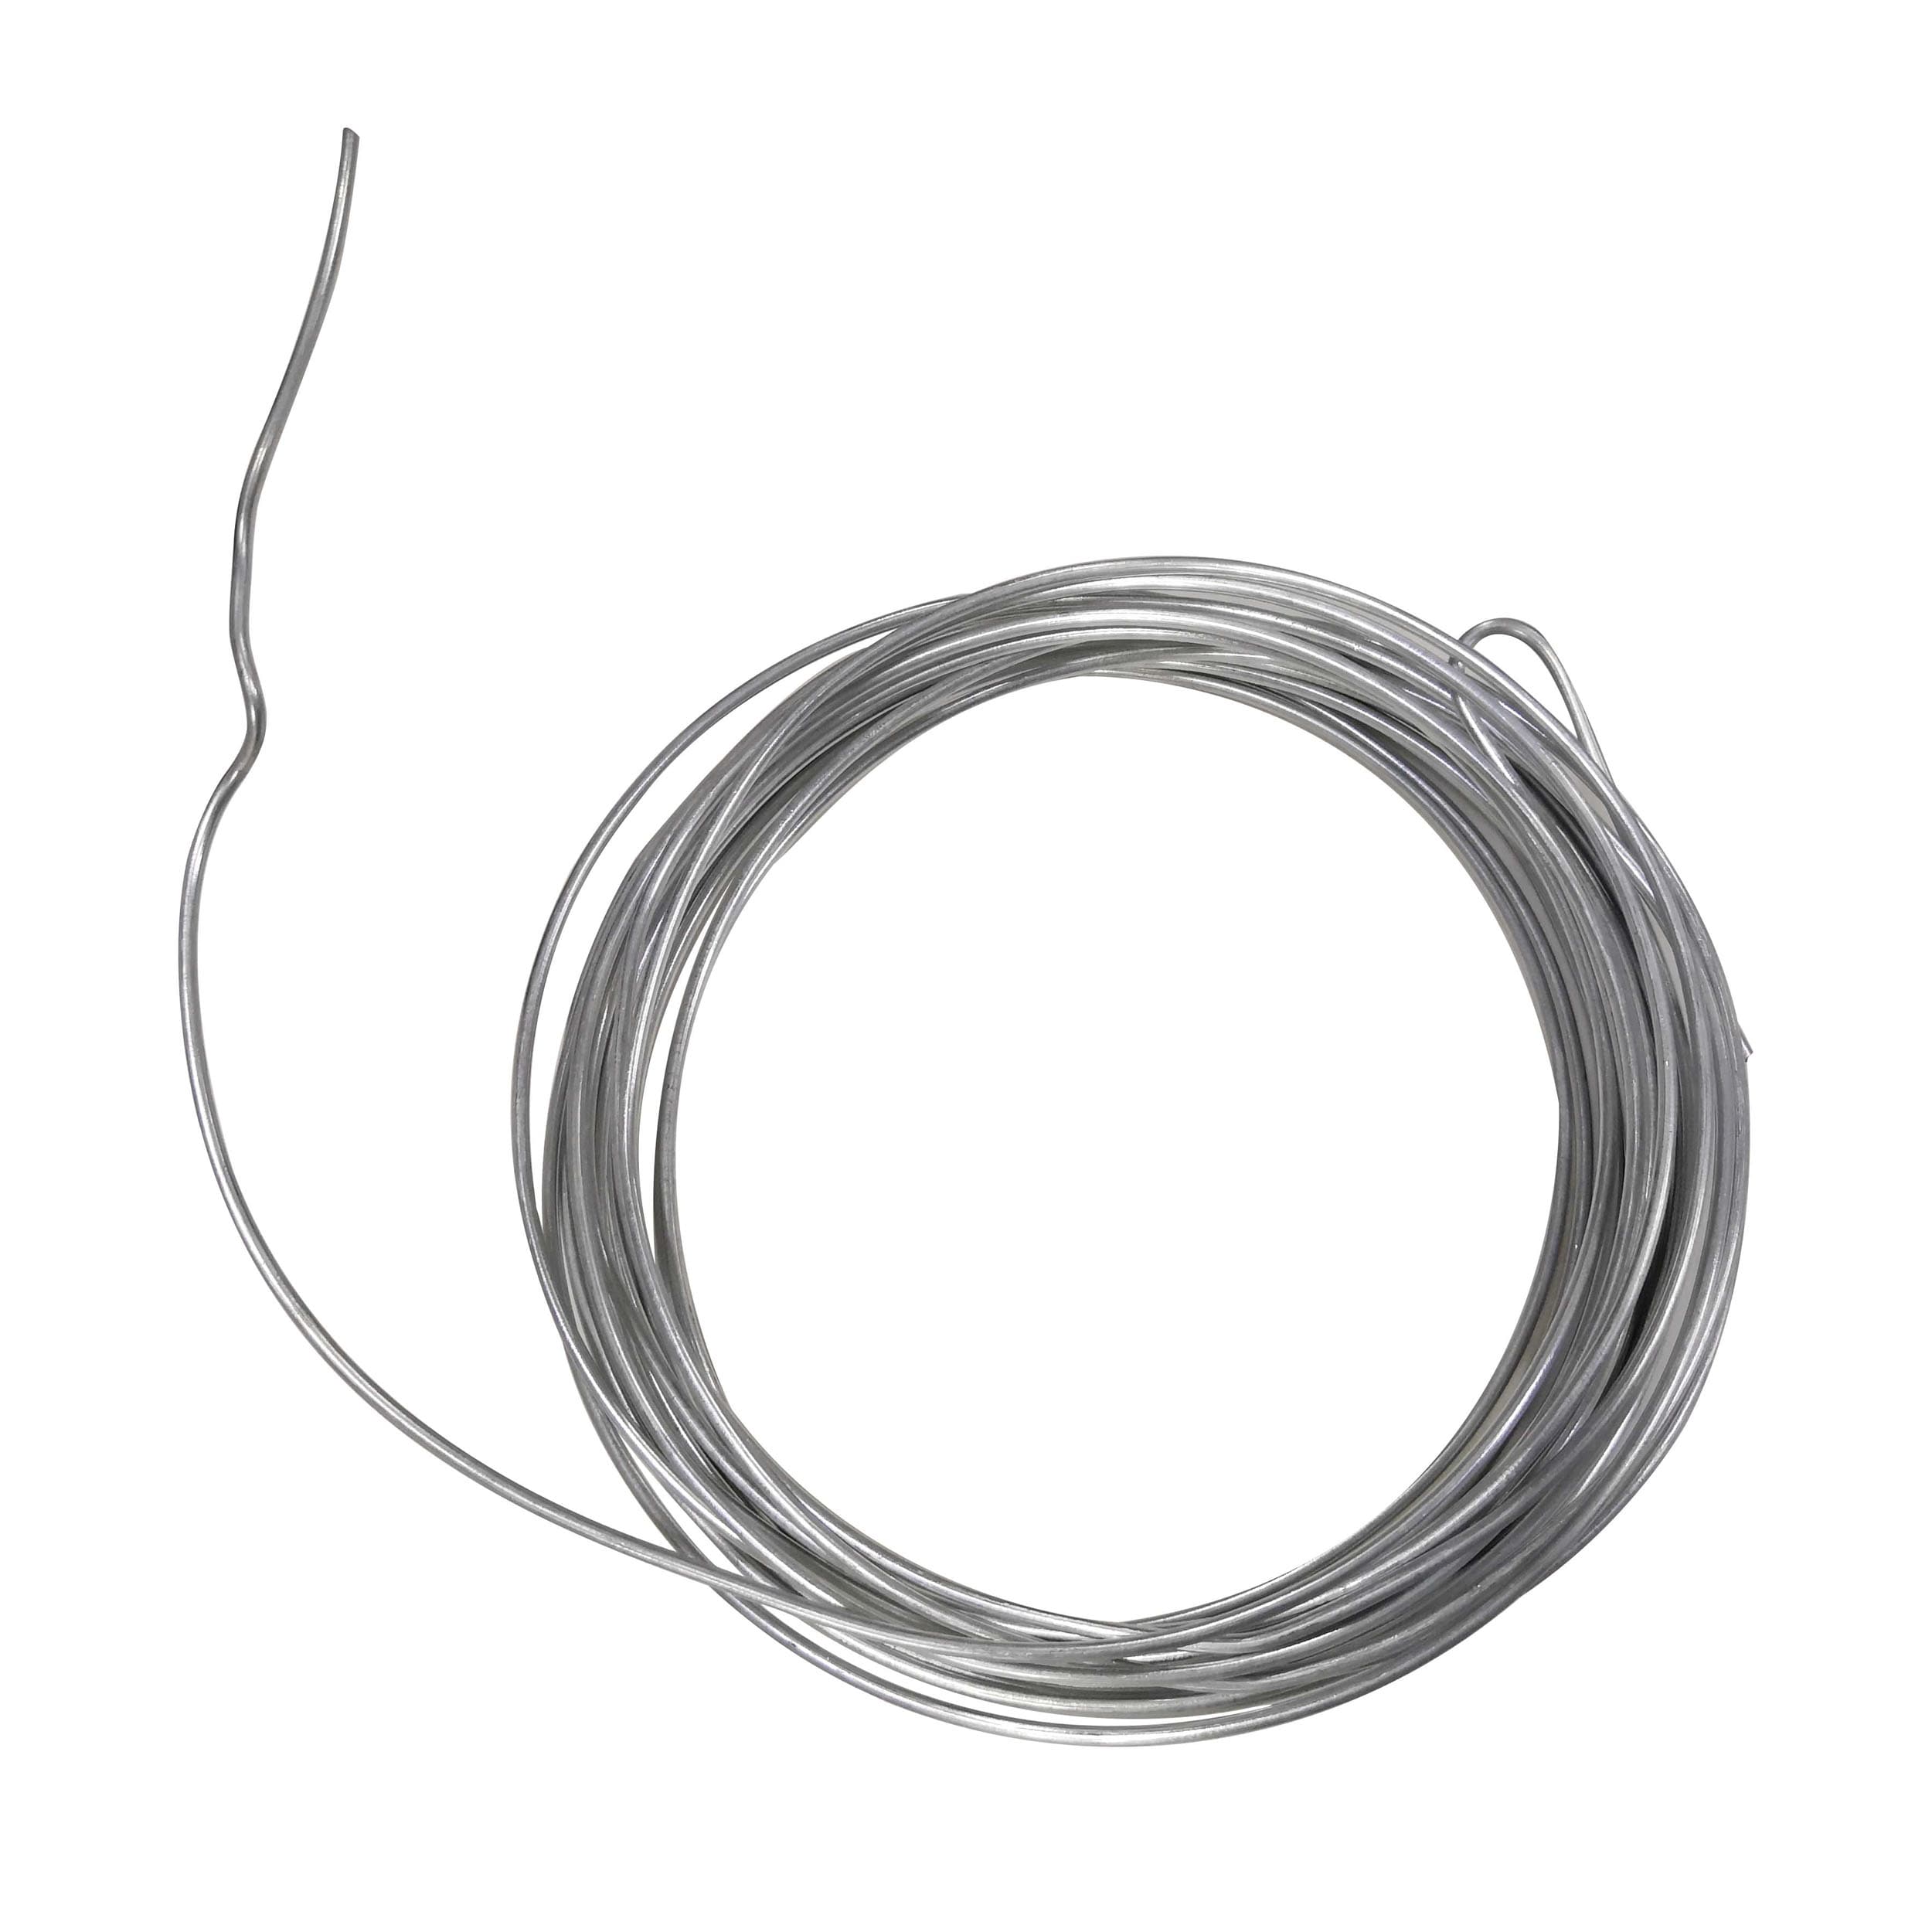 OOK Stainless Steel Picture Hanging Wire 9 ft.